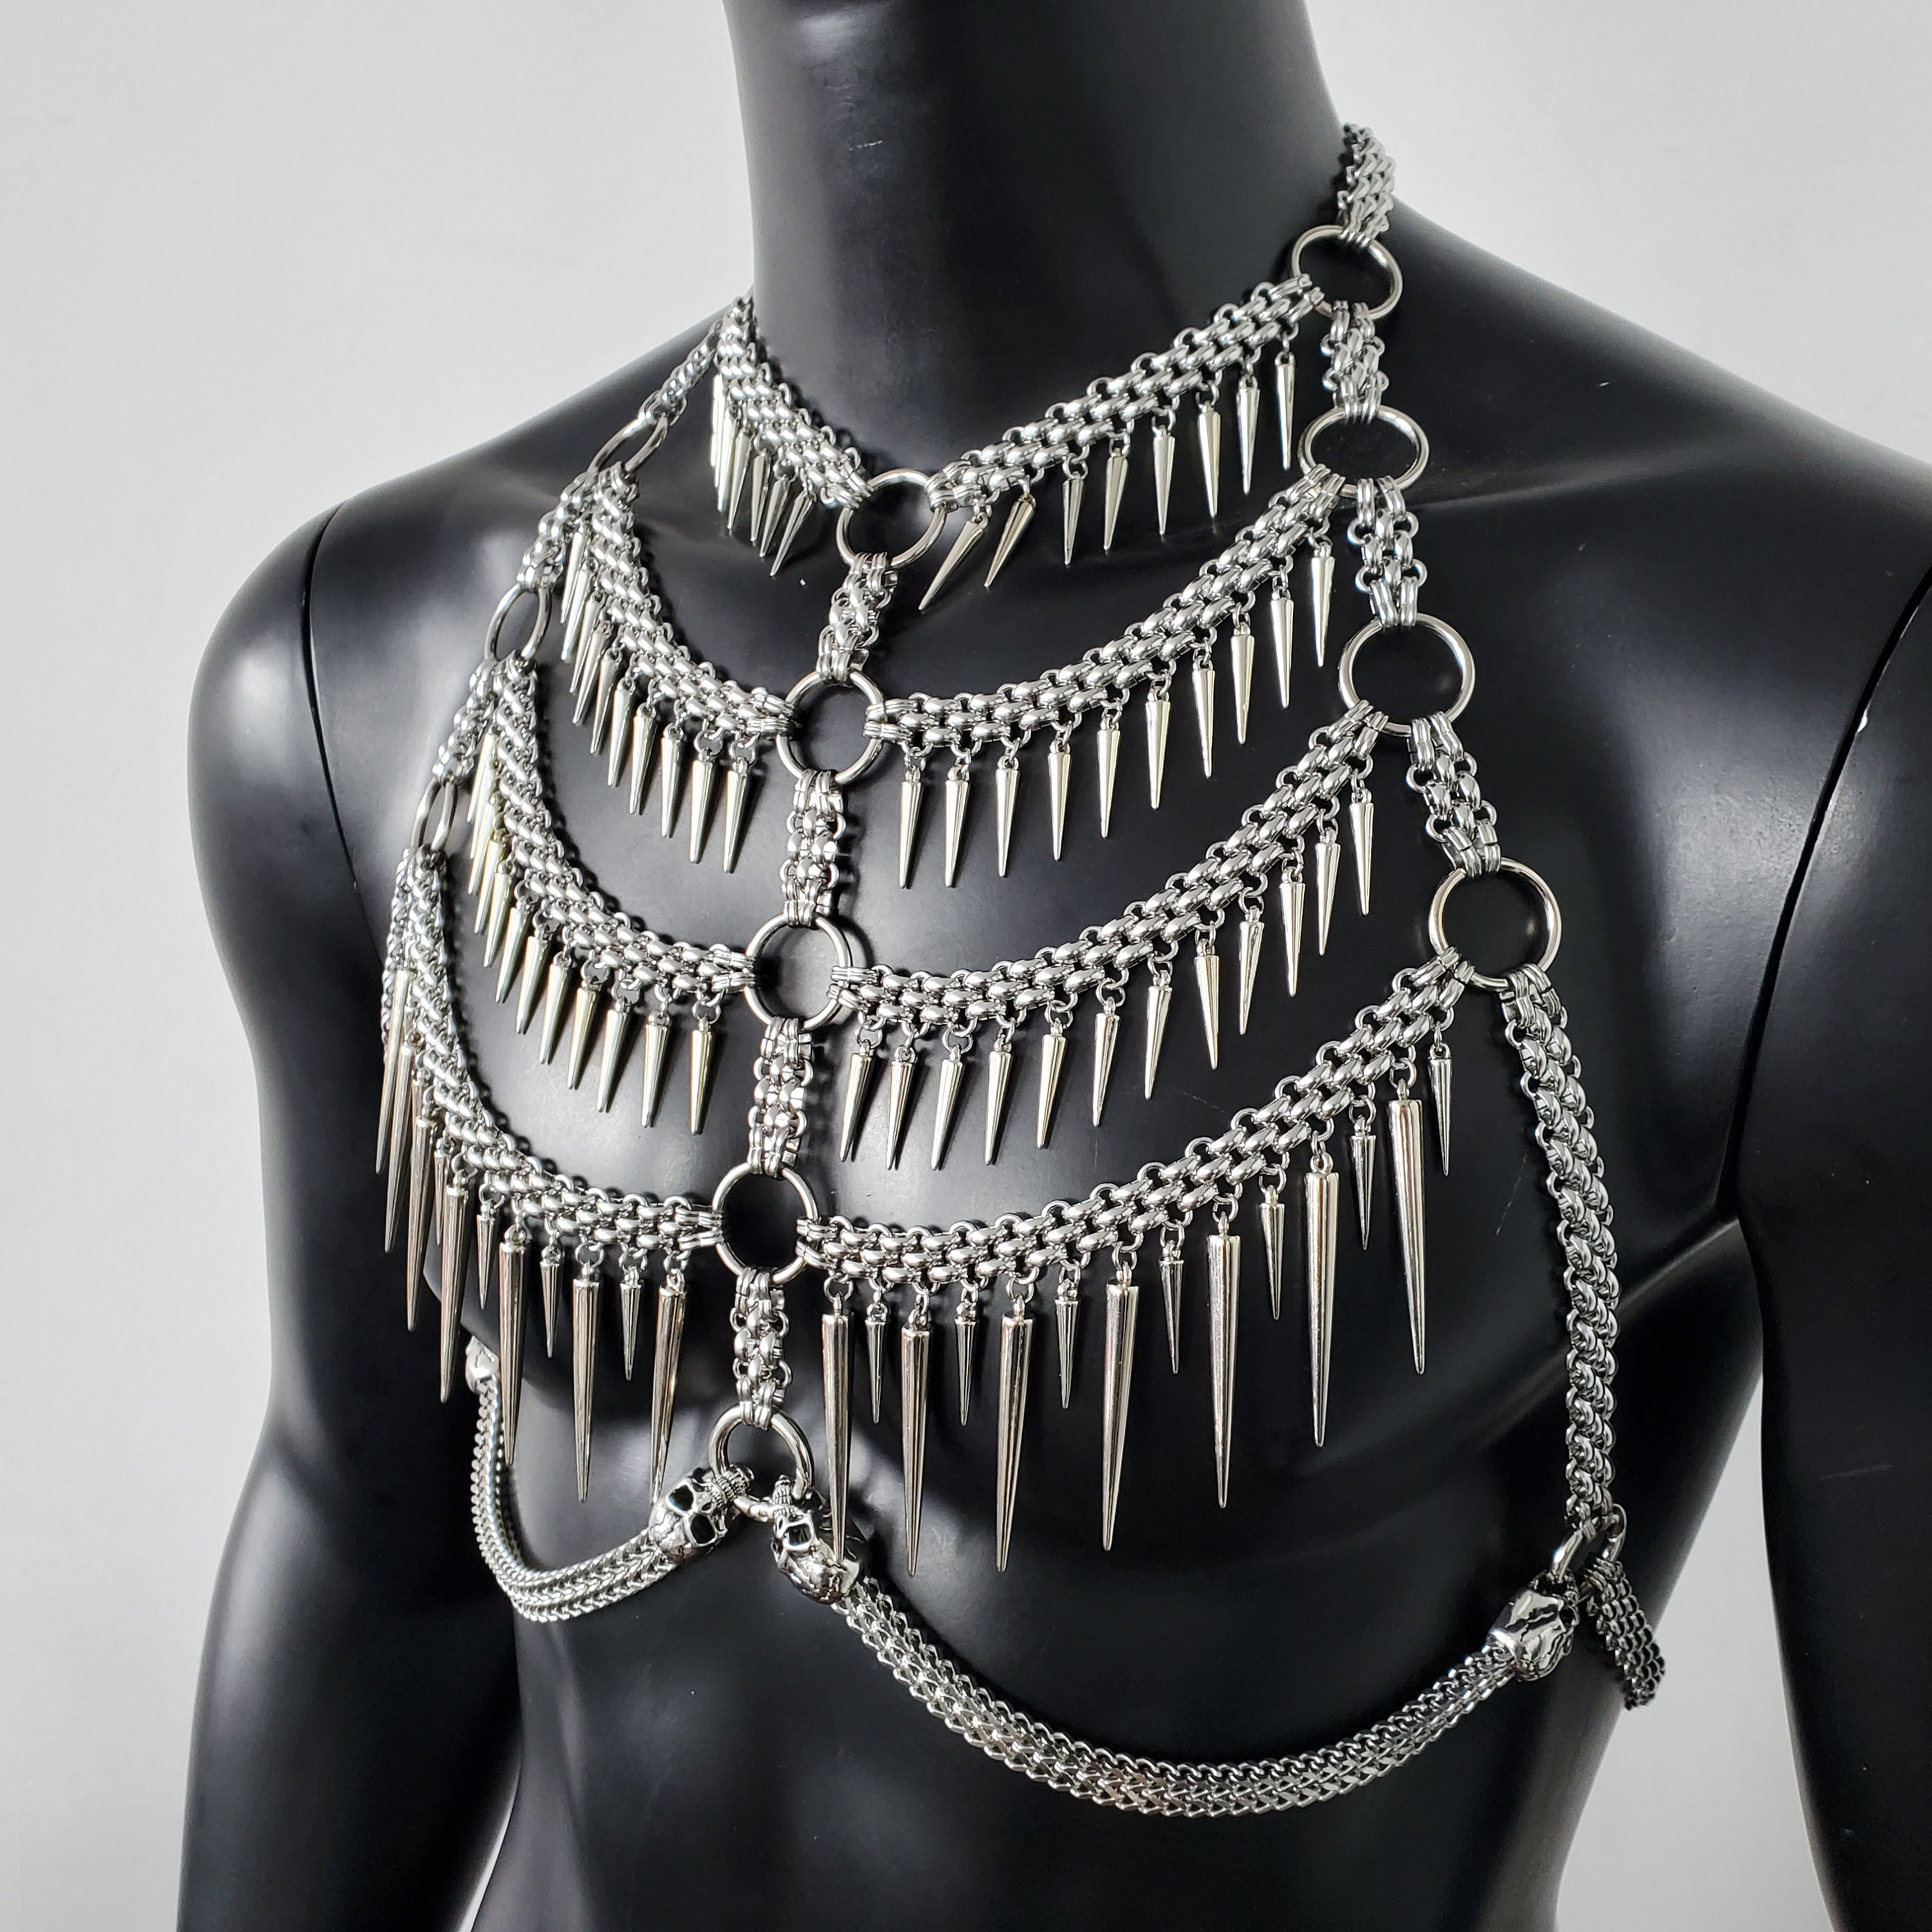 Chainmail Lingerie -  Canada